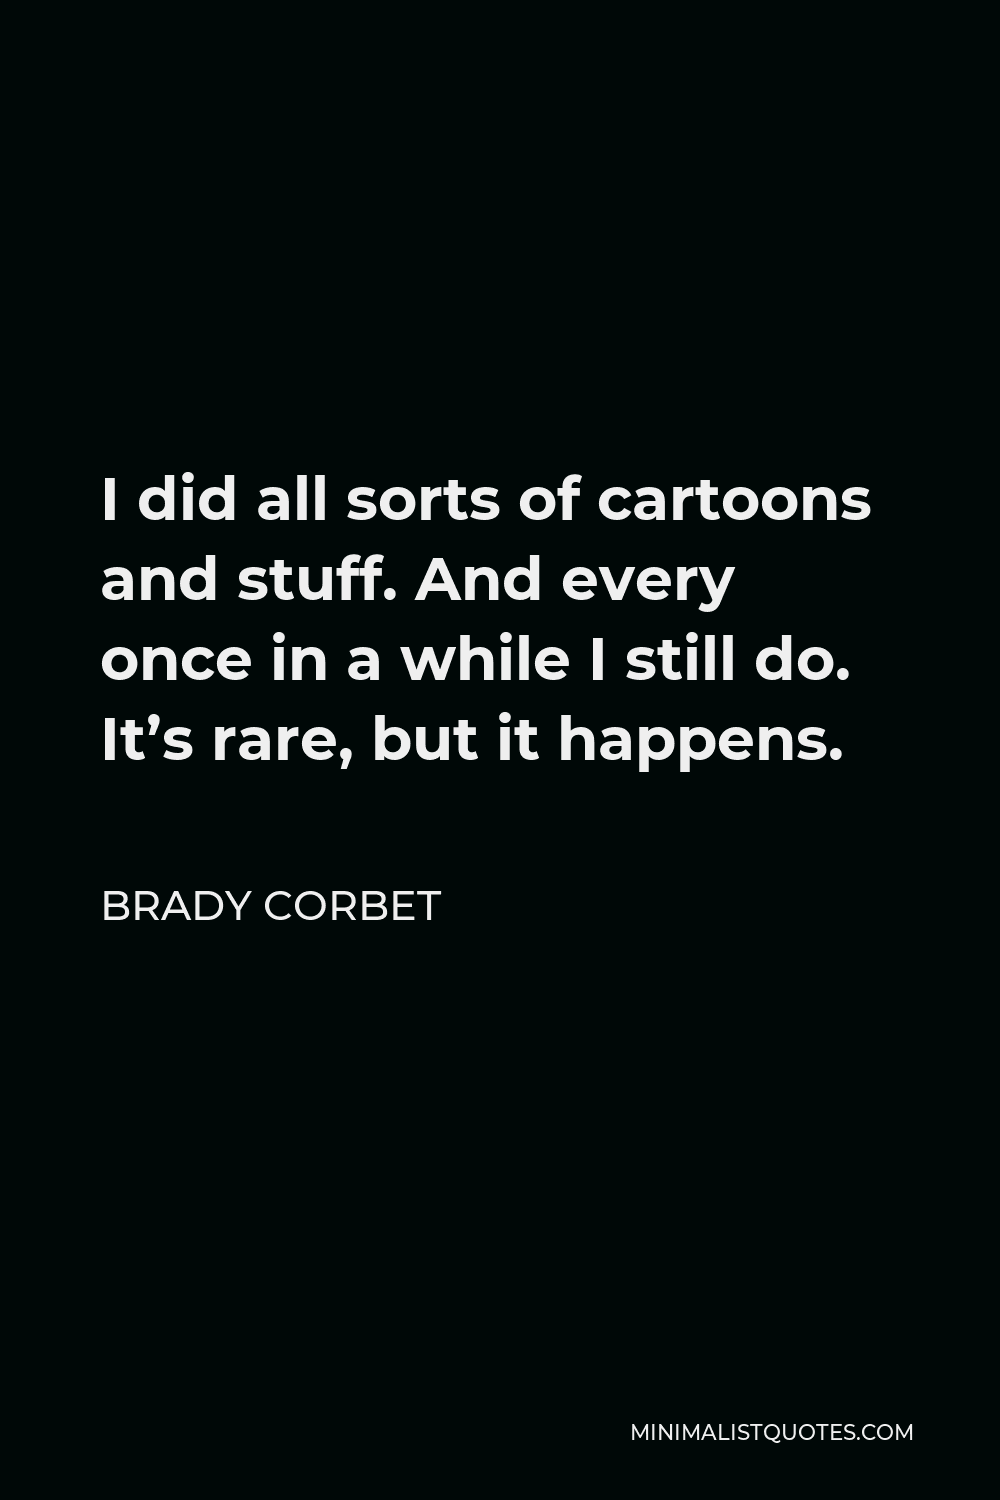 Brady Corbet Quote - I did all sorts of cartoons and stuff. And every once in a while I still do. It’s rare, but it happens.